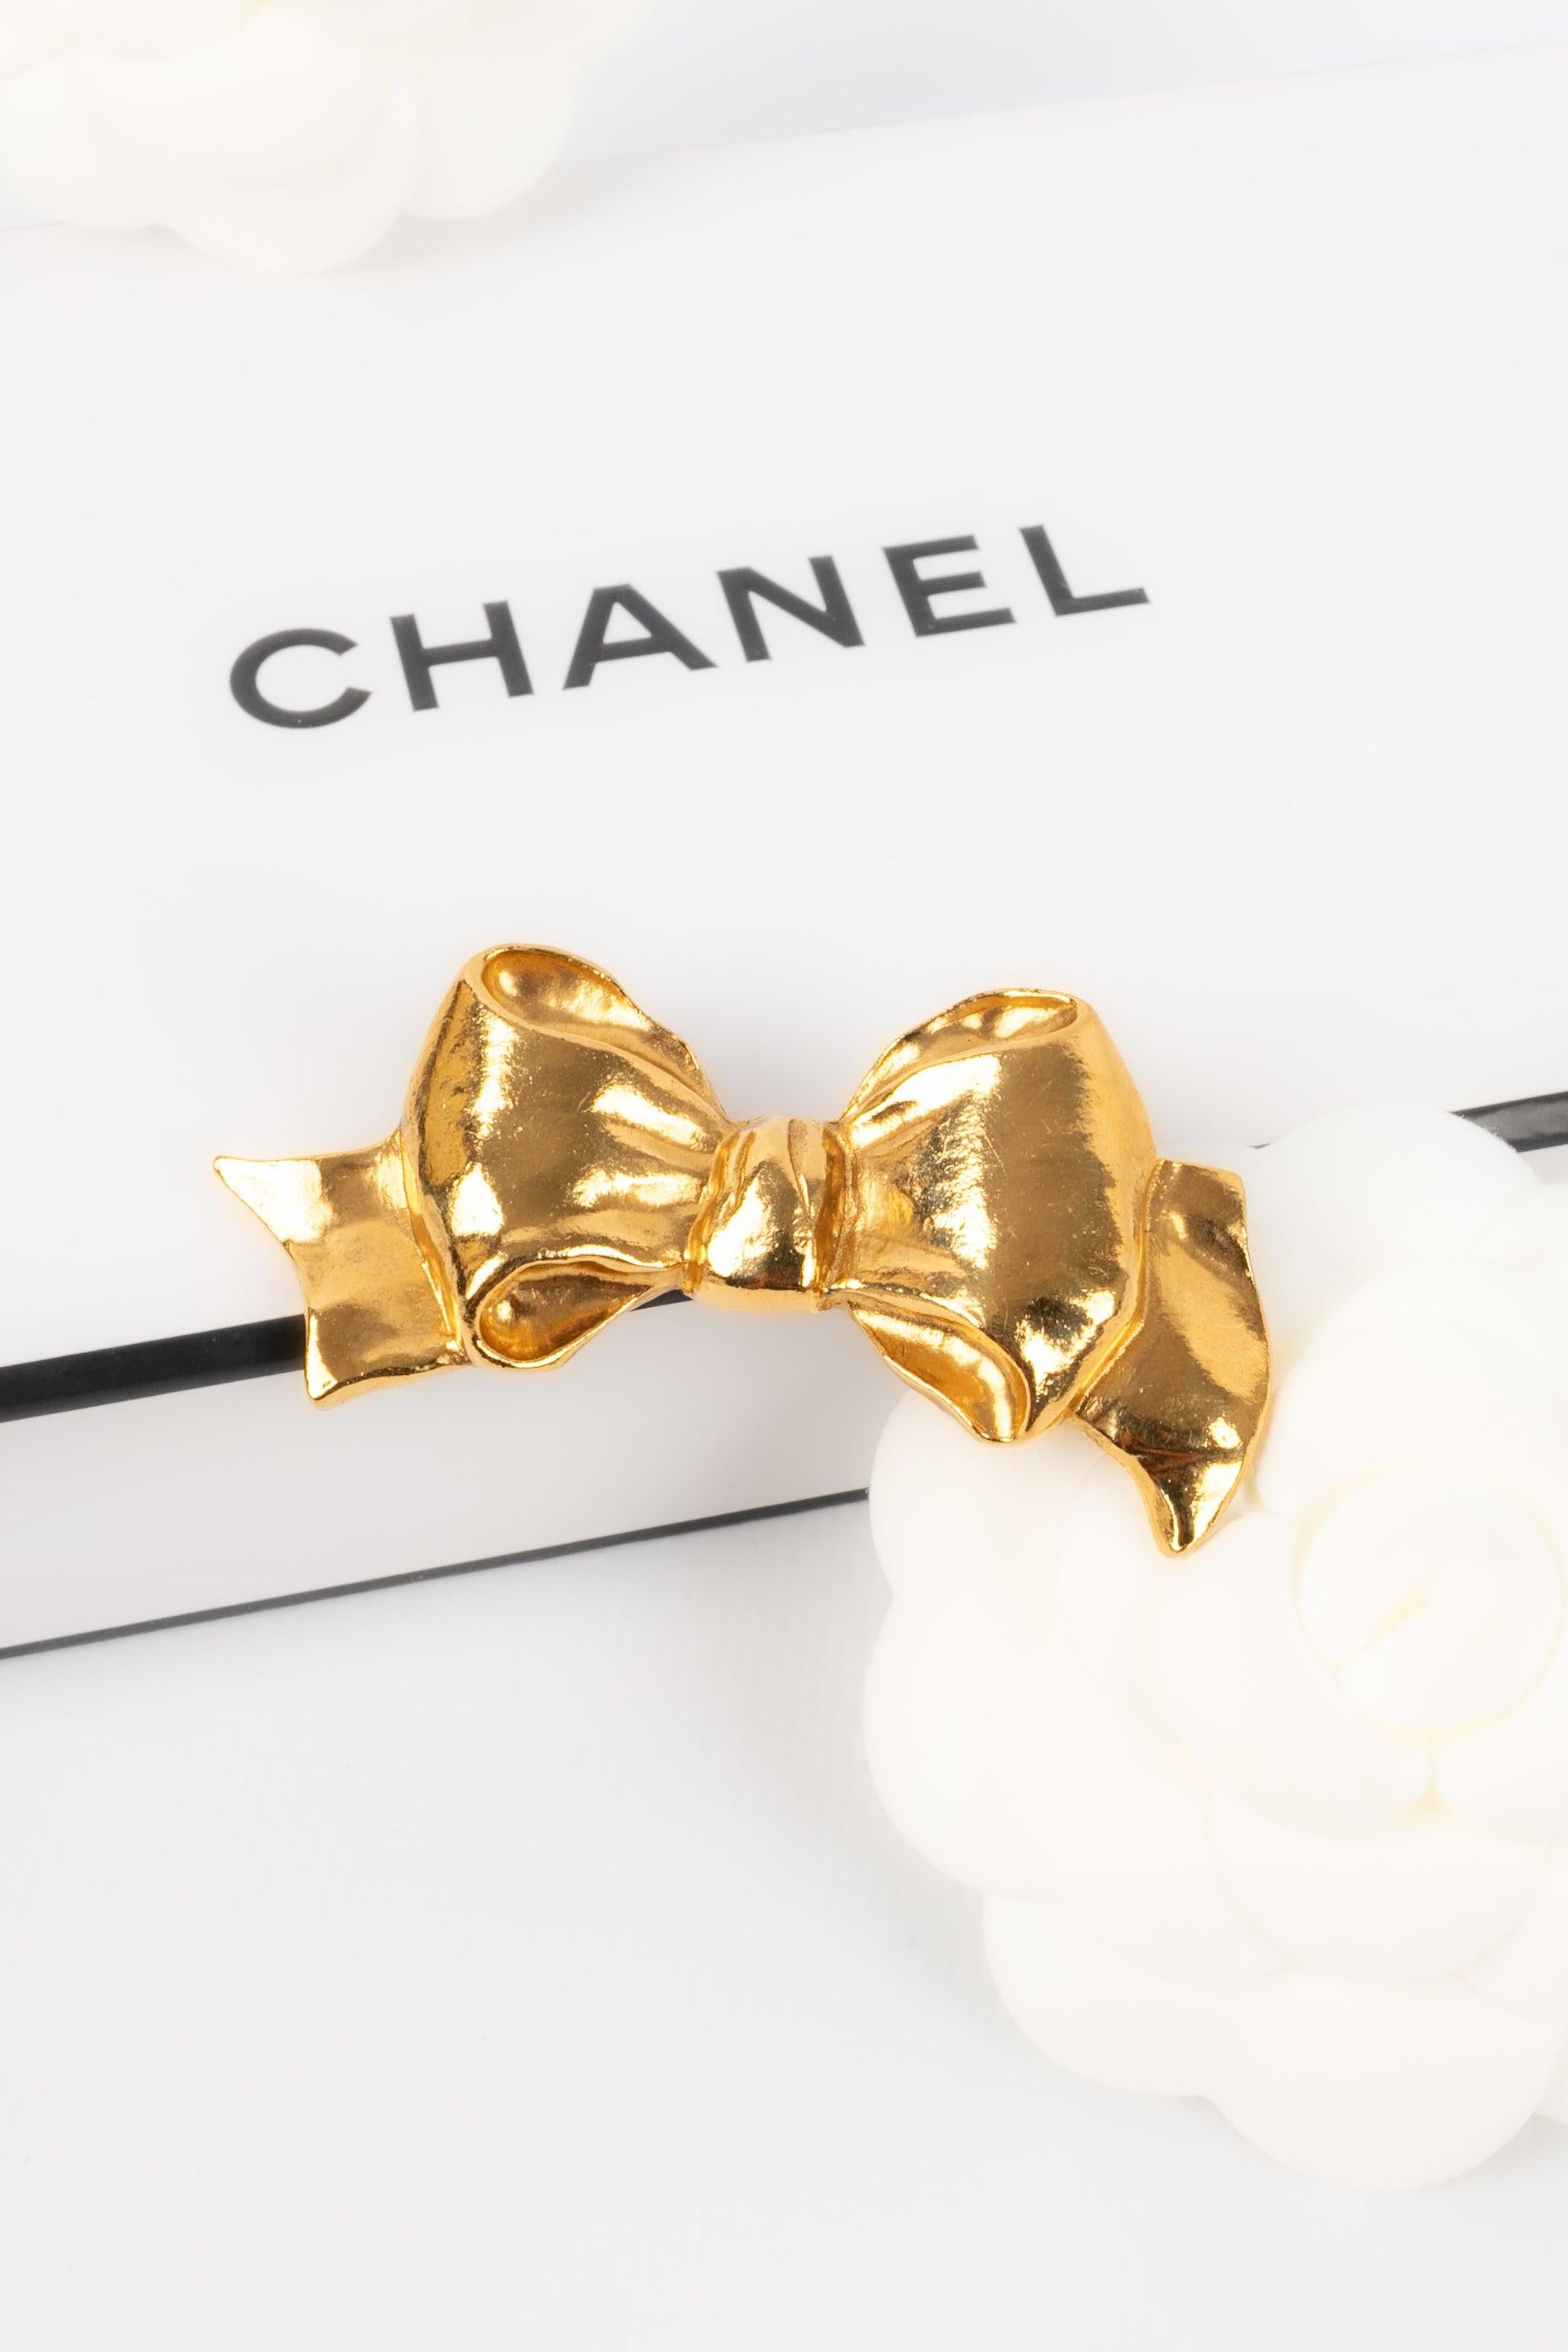 Chanel Bow Brooch in Gold-Plated Metal Representing a Bow, 1990s For Sale 1